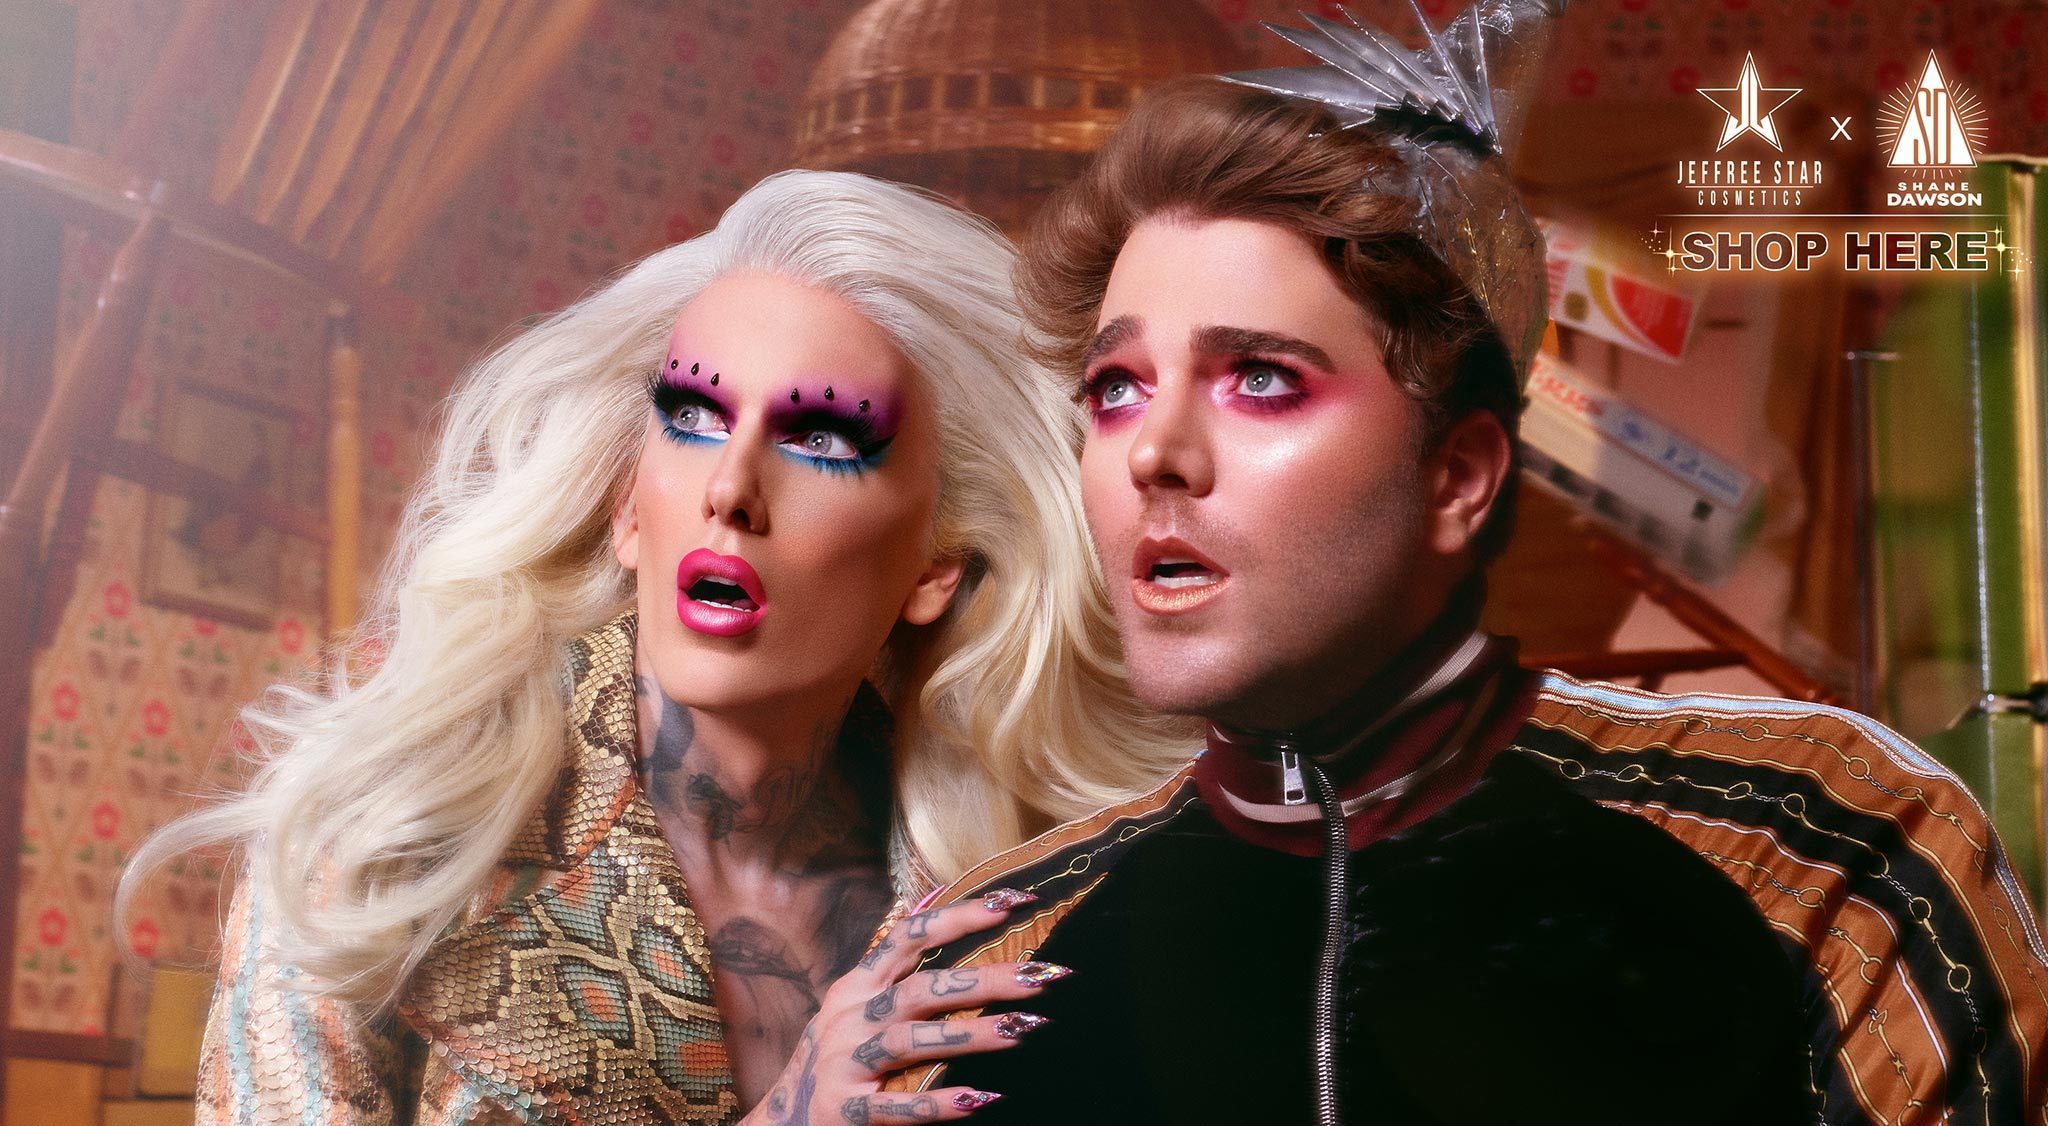 Shane Dawson and Jeffree Star create a hit YouTube and amazing makeup products - The Western Howl